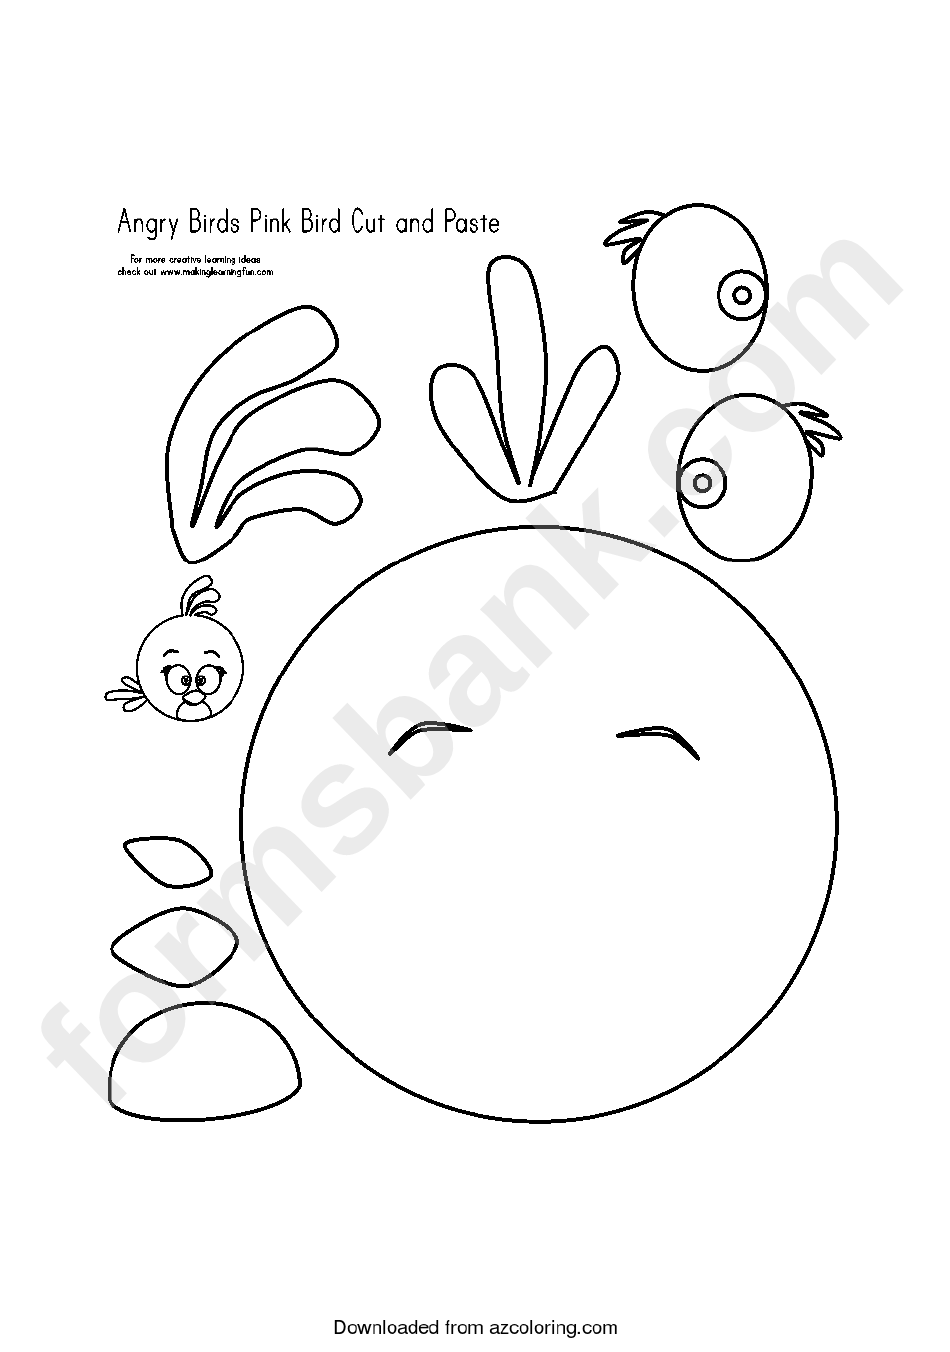 cut-out-angry-birds-template-printable-pdf-download